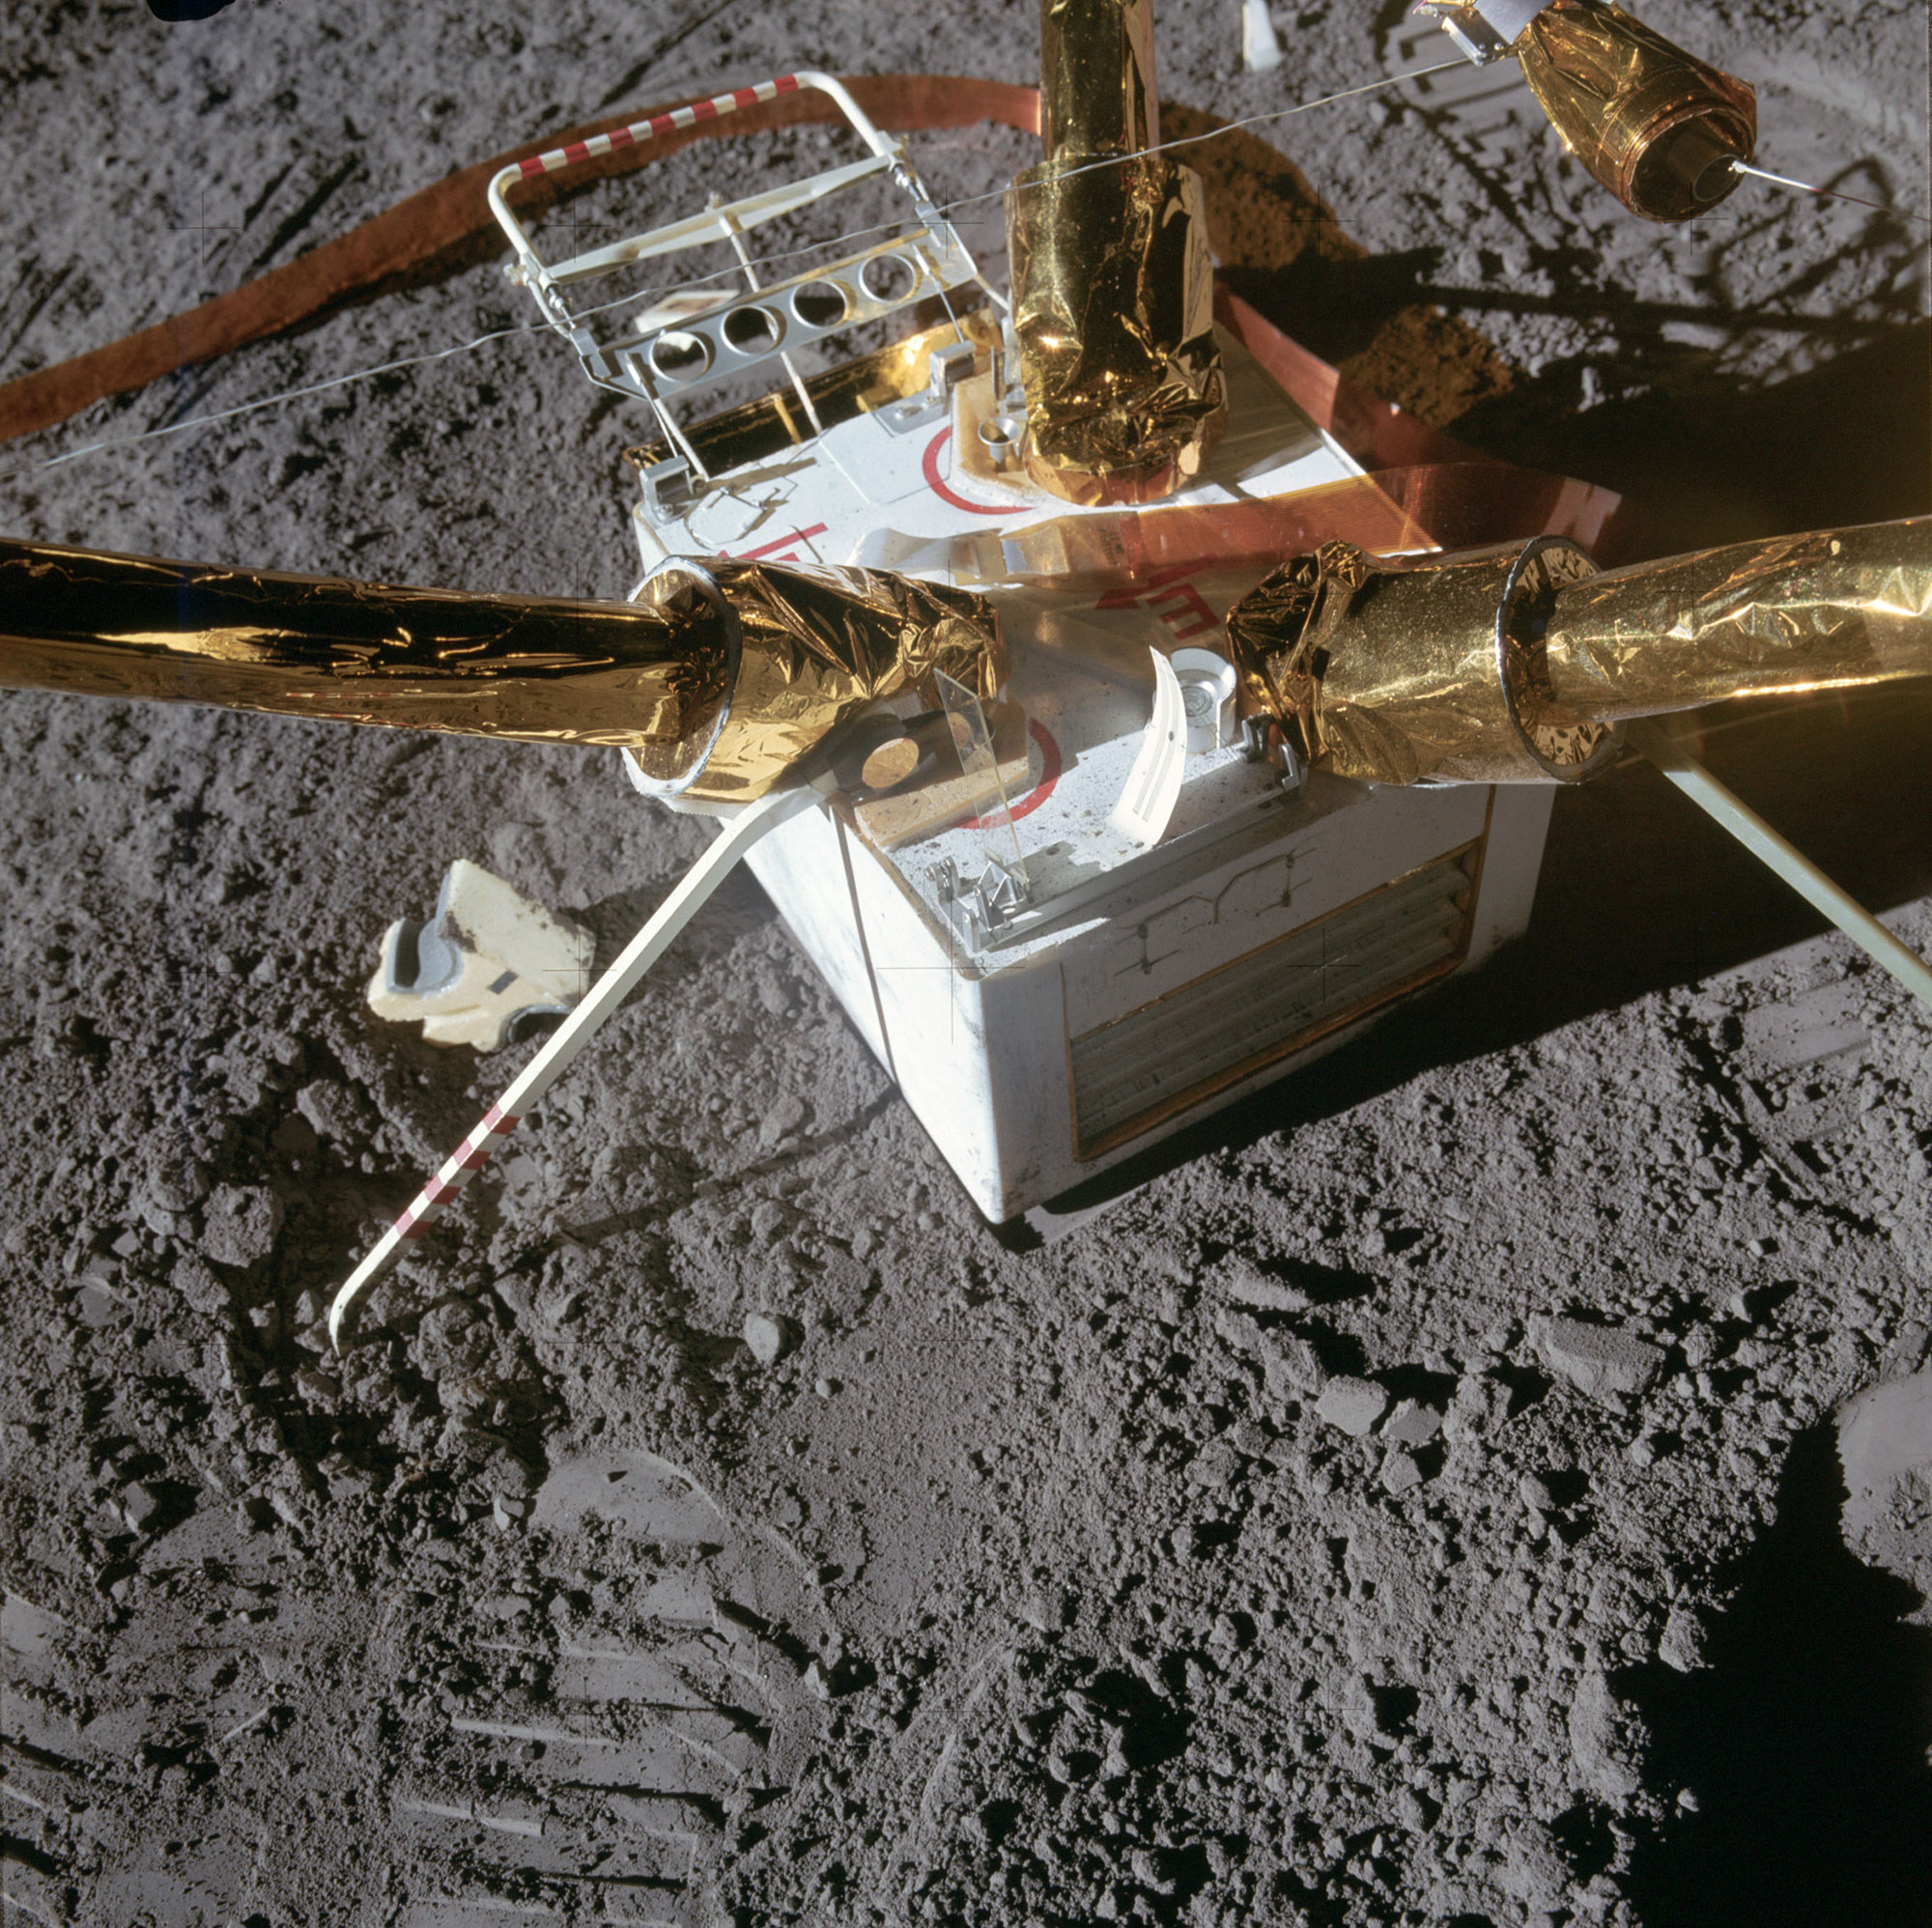 The Lunar Surface Magnetometer that was part of the mission’s Apollo Lunar Surface Experiments Package. Credit: NASA via Retro Space Images